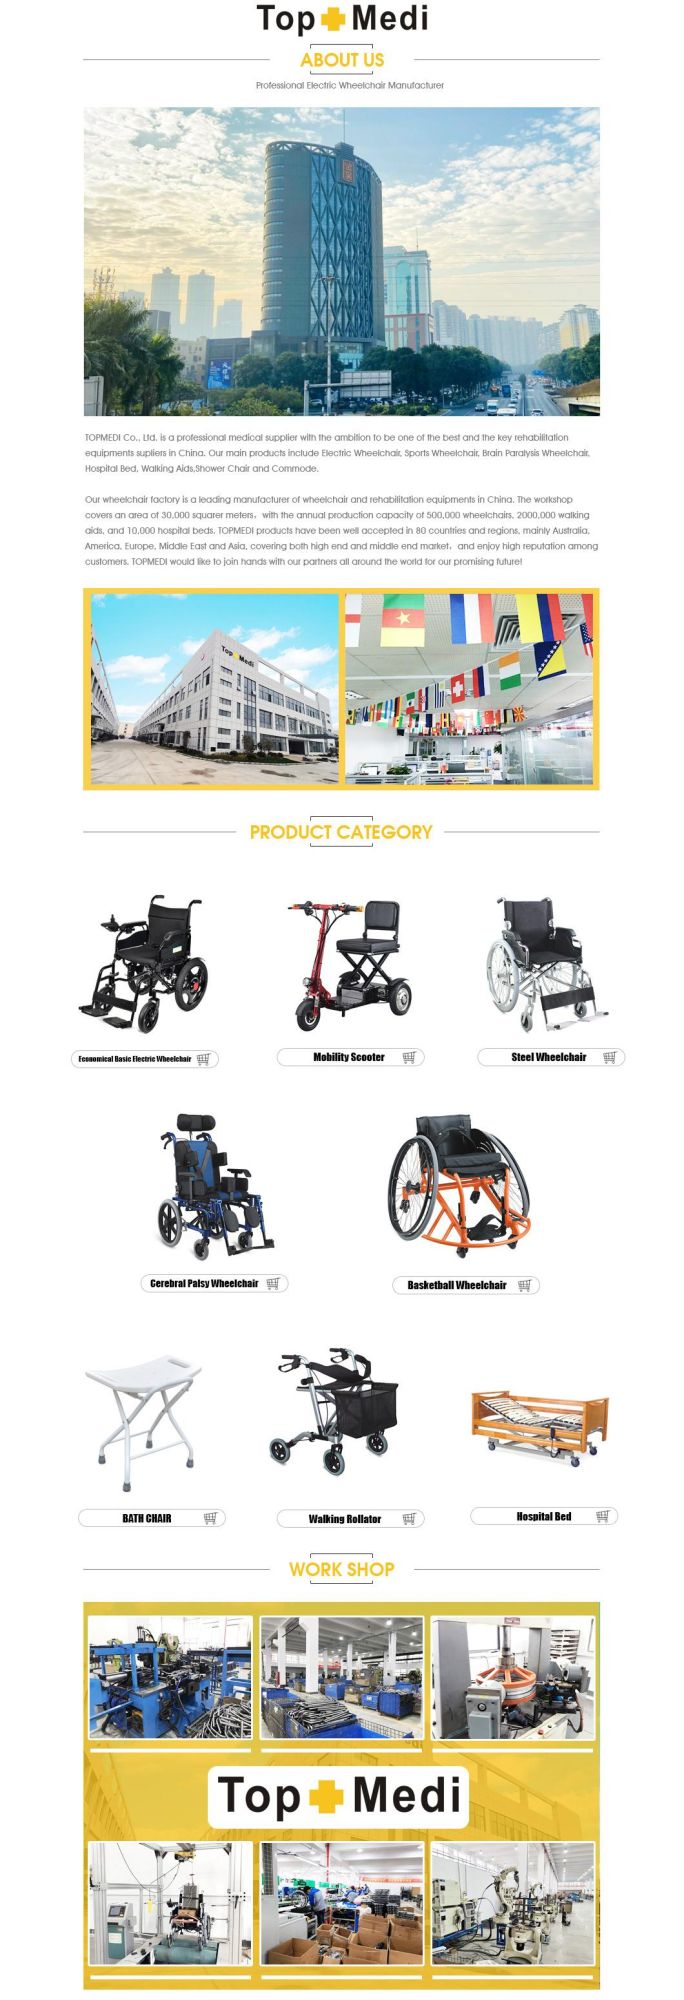 Portable Rolling Walkers Easy Folding Rollator Walker for Elderly and Disabled People